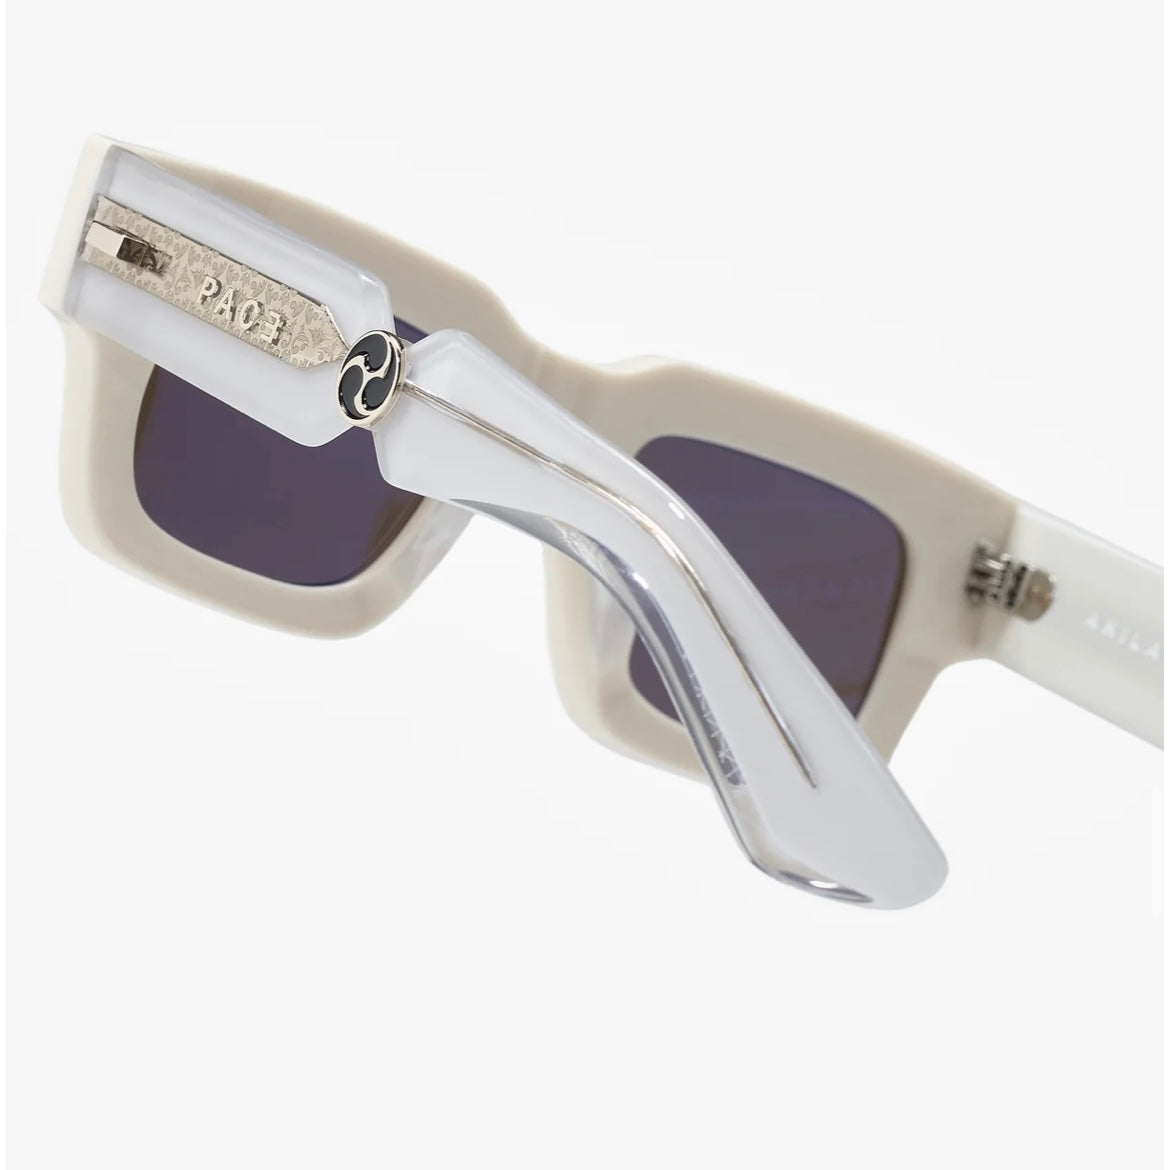 PACE X AKILA - SUNGLASSES ARES IVORY ALWAYS BUSY BRAND ABB